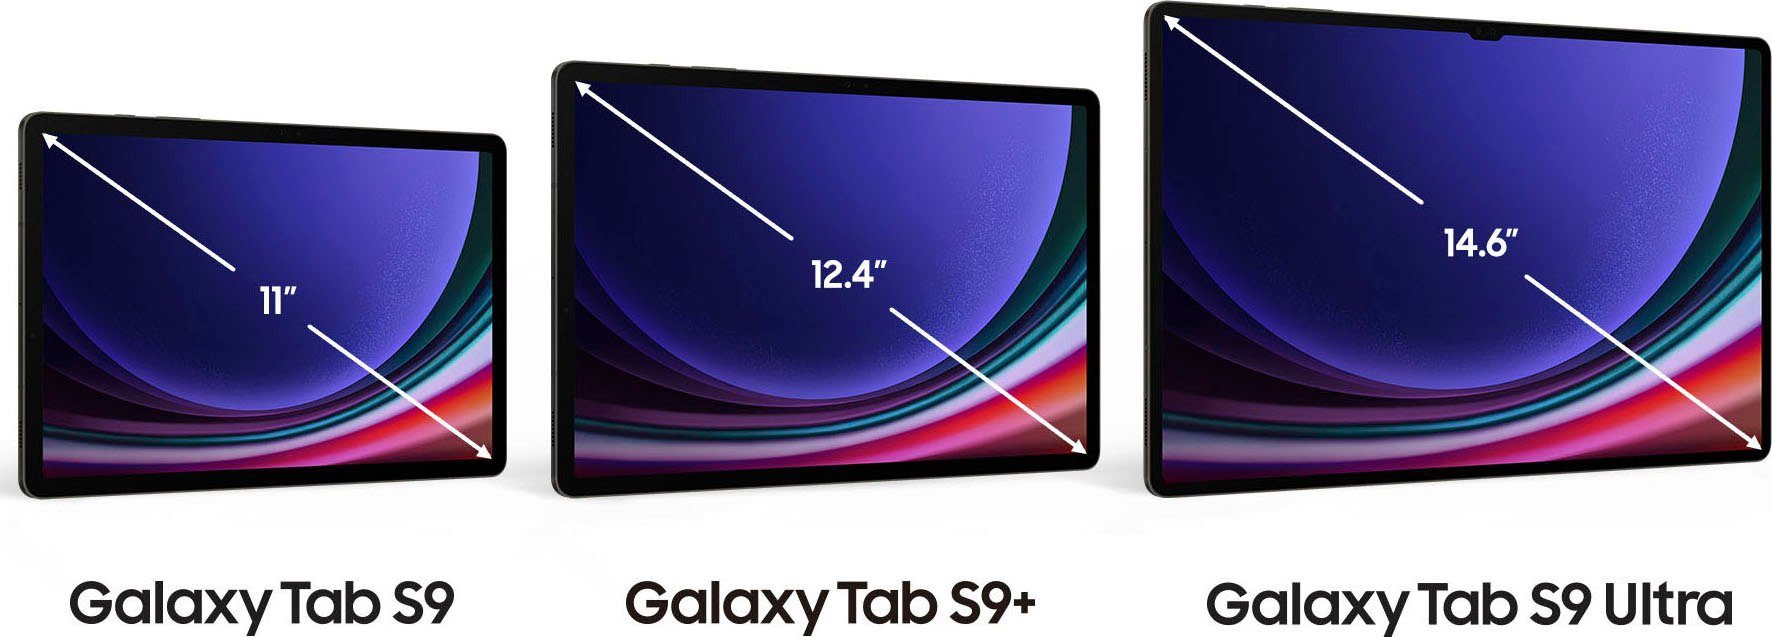 Tablet Graphite Tab Android) Samsung WiFi S9+ 256 Galaxy (12,4", GB,